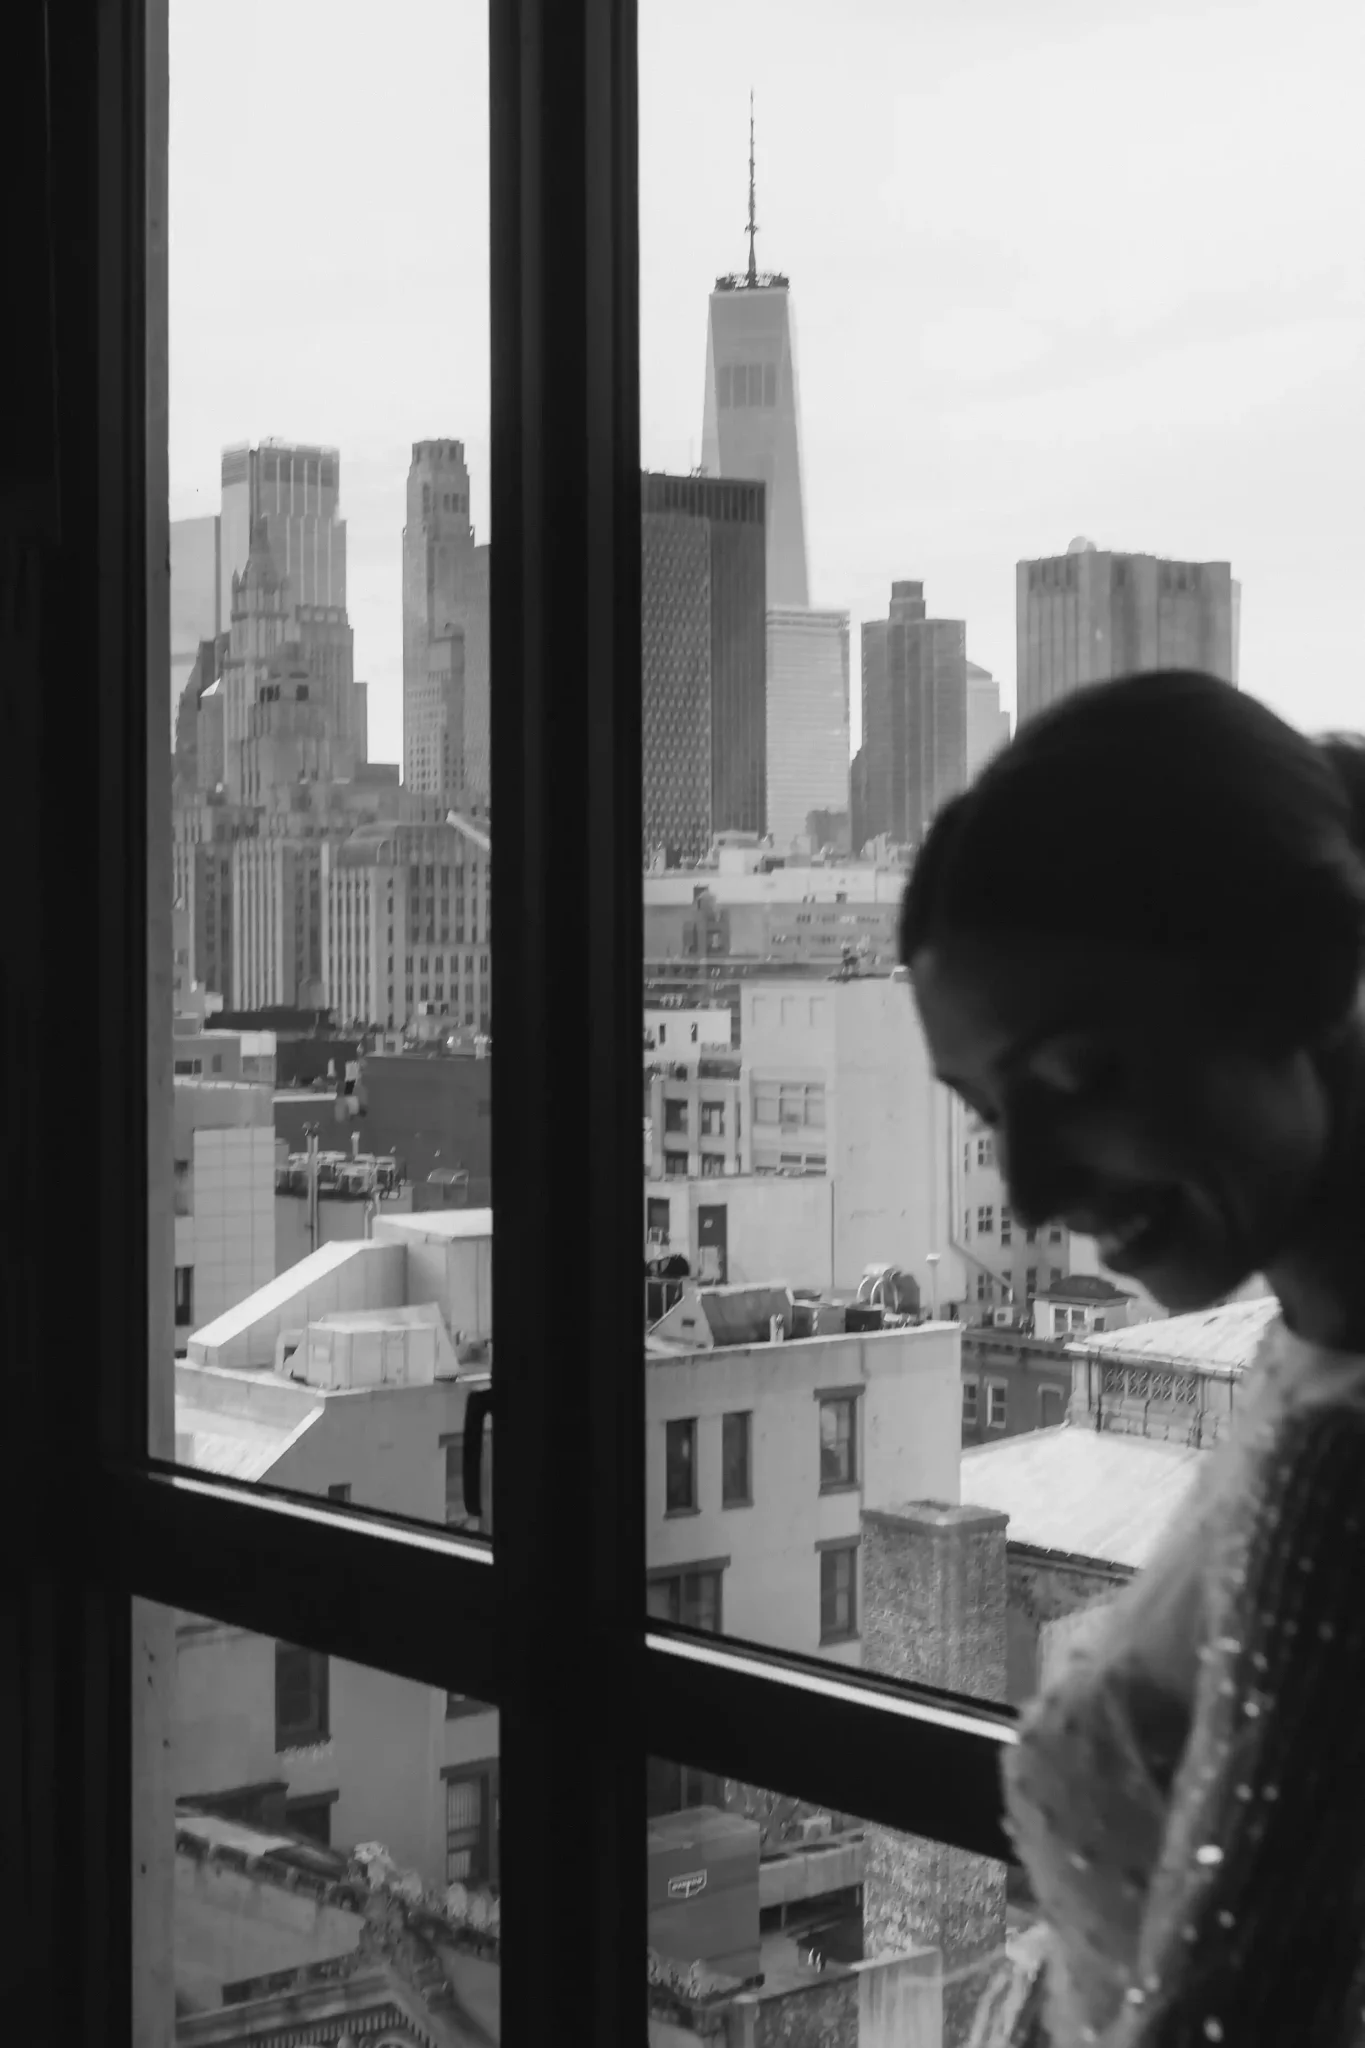 A bride looking out of a window with a view of the city.